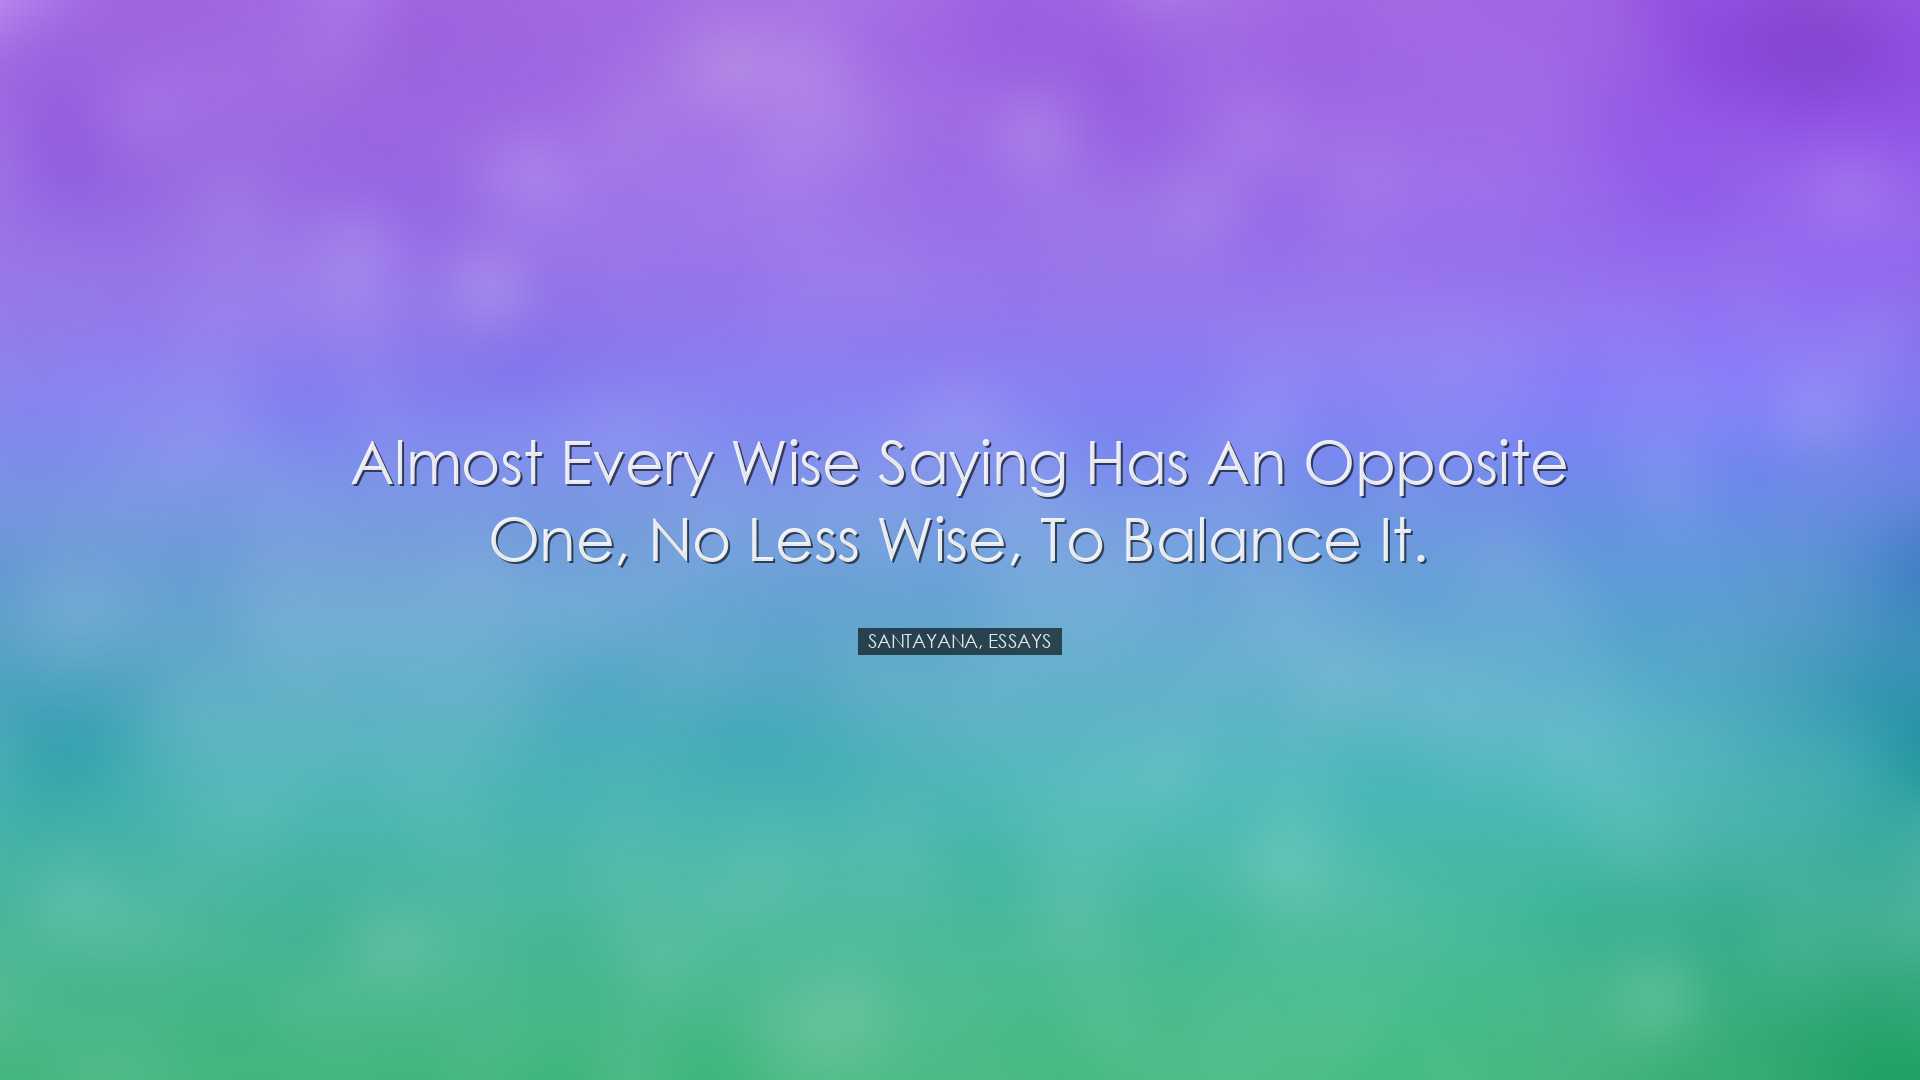 Almost every wise saying has an opposite one, no less wise, to bal